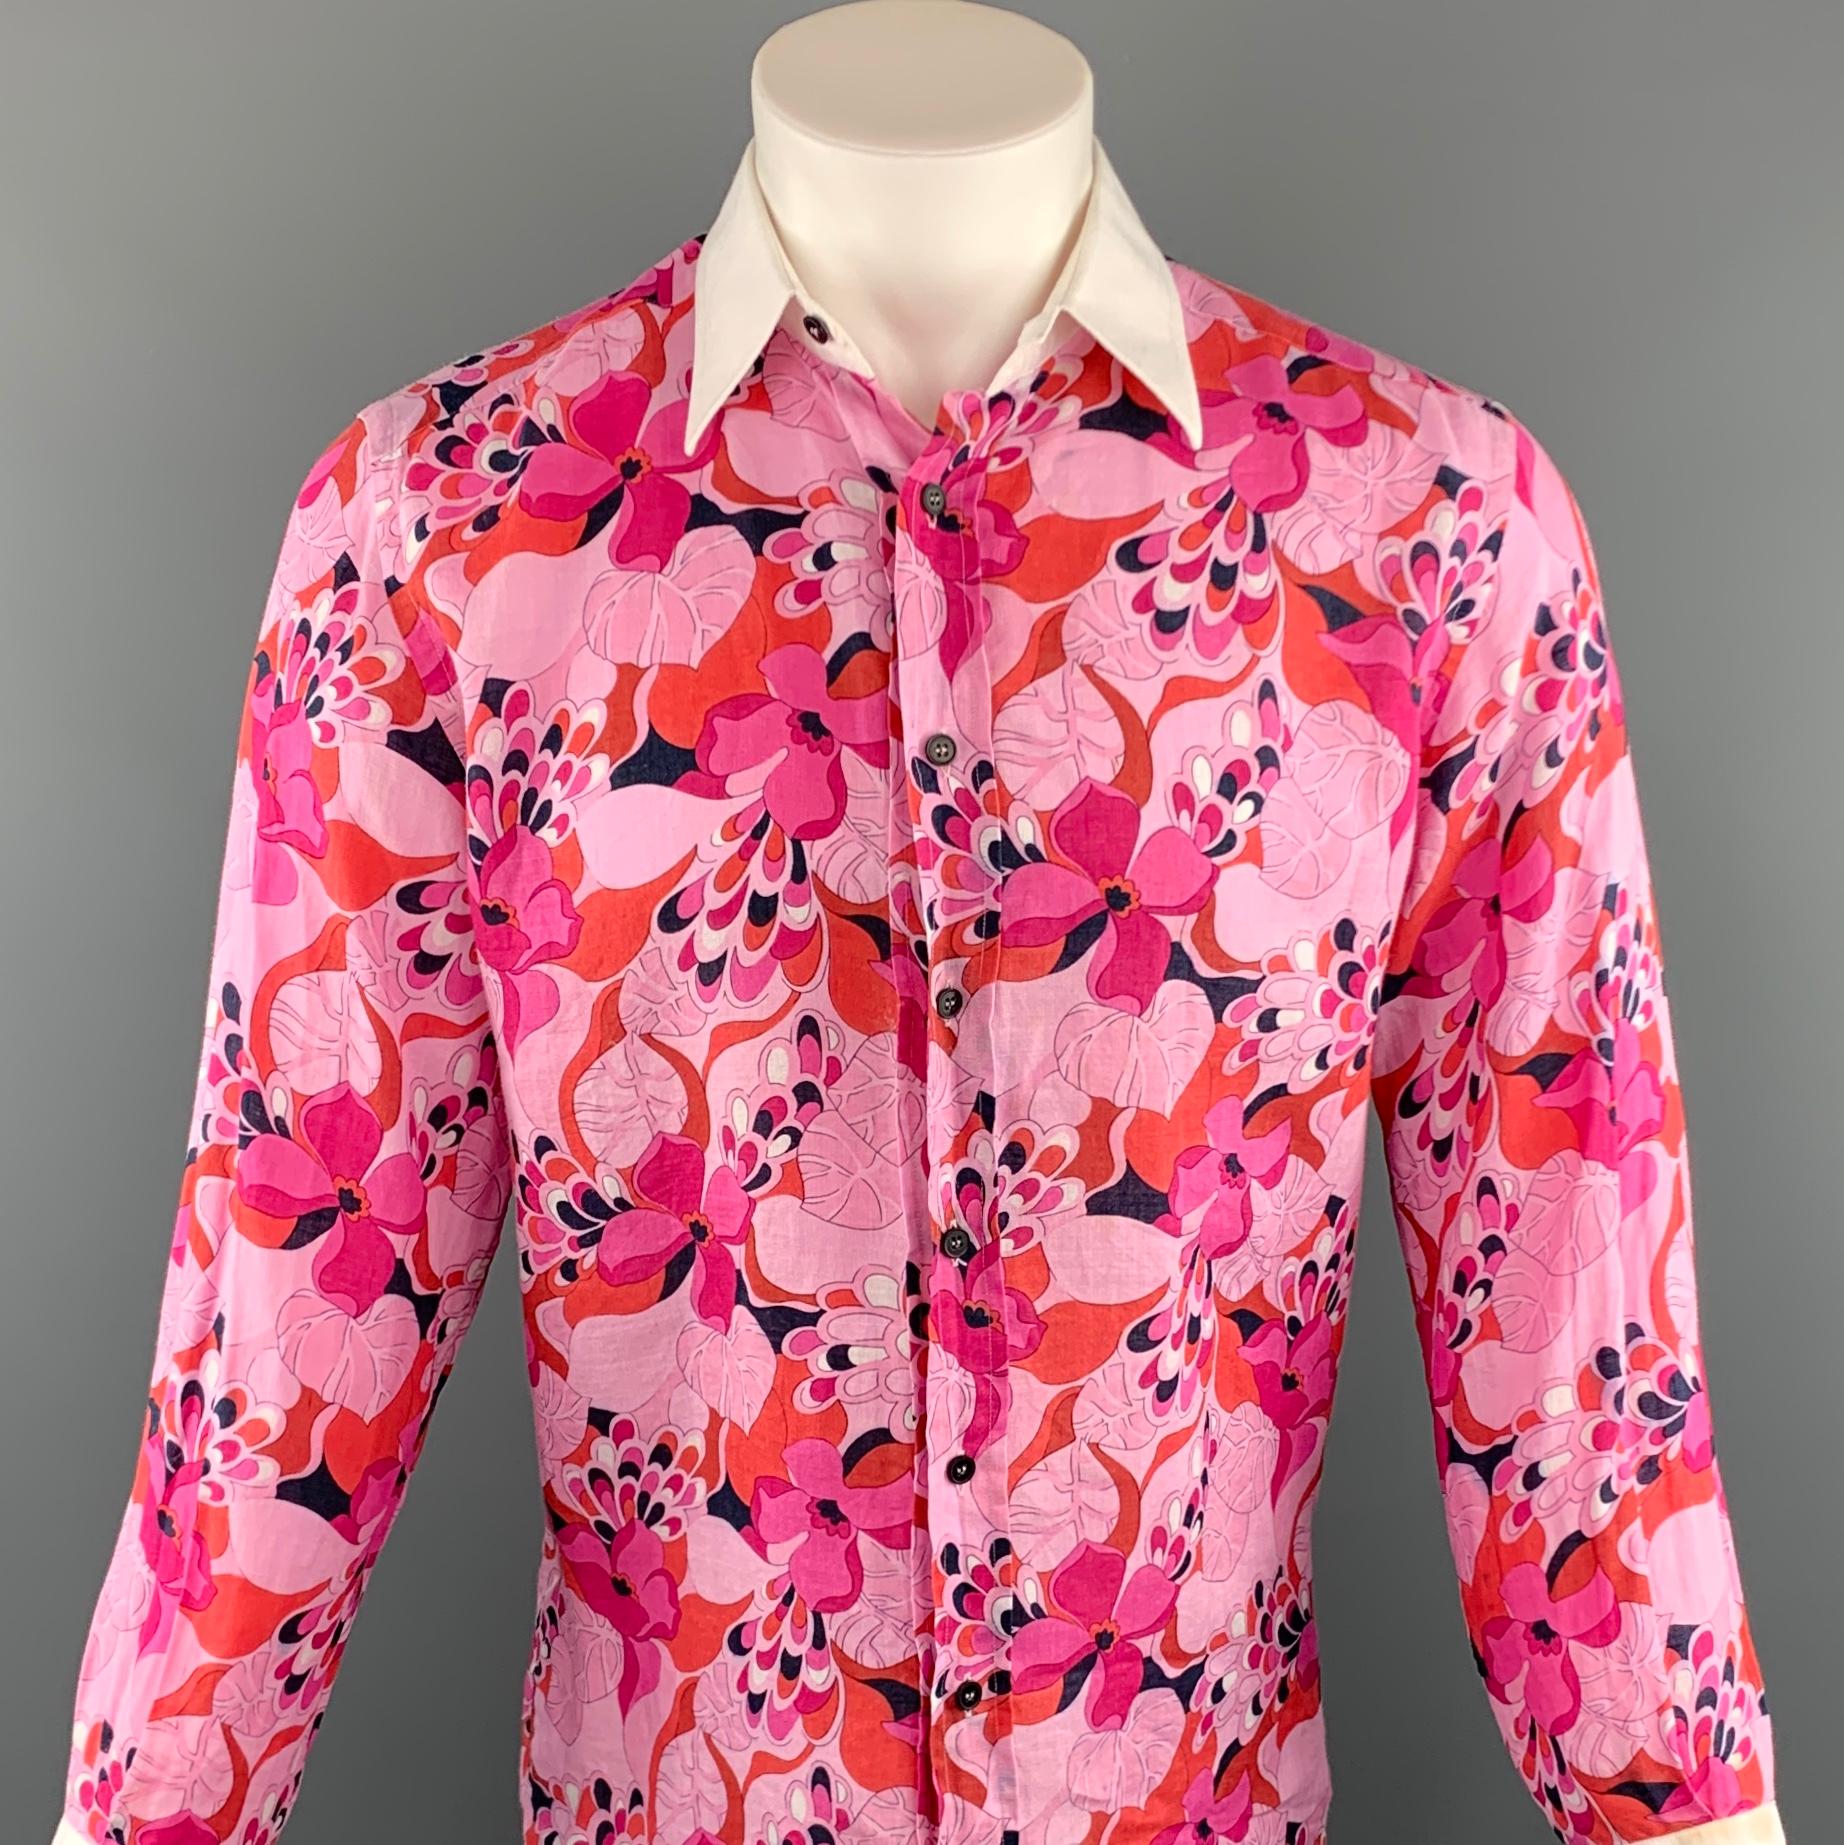 DOLCE & GABBANA long sleeve shirt comes in a pink floral linen featuring a button up style with white cuffs and collar. Minor stains and discolorations throughout. Made in Italy.
 
Good Pre-Owned Condition.
Marked: 39
 
Measurements:
 
Shoulder: 17